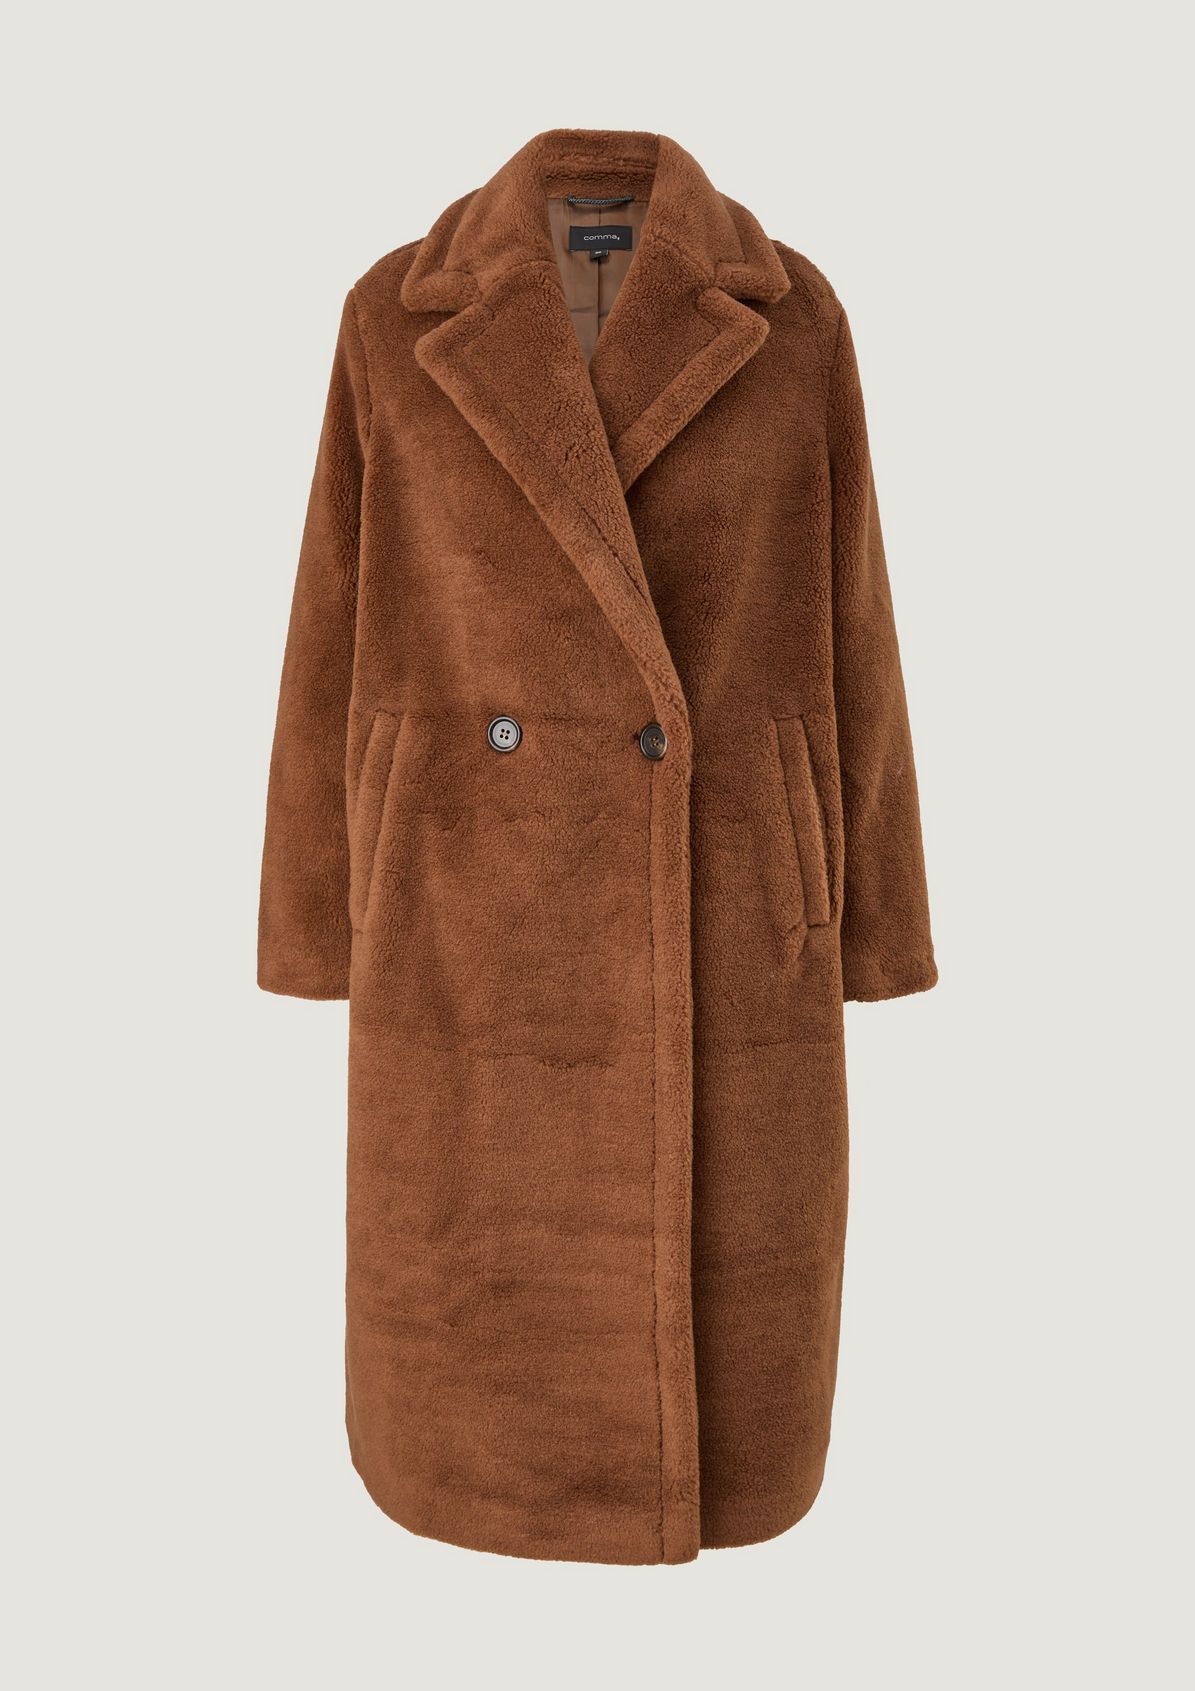 Teddy plush coat with a lapel collar from comma